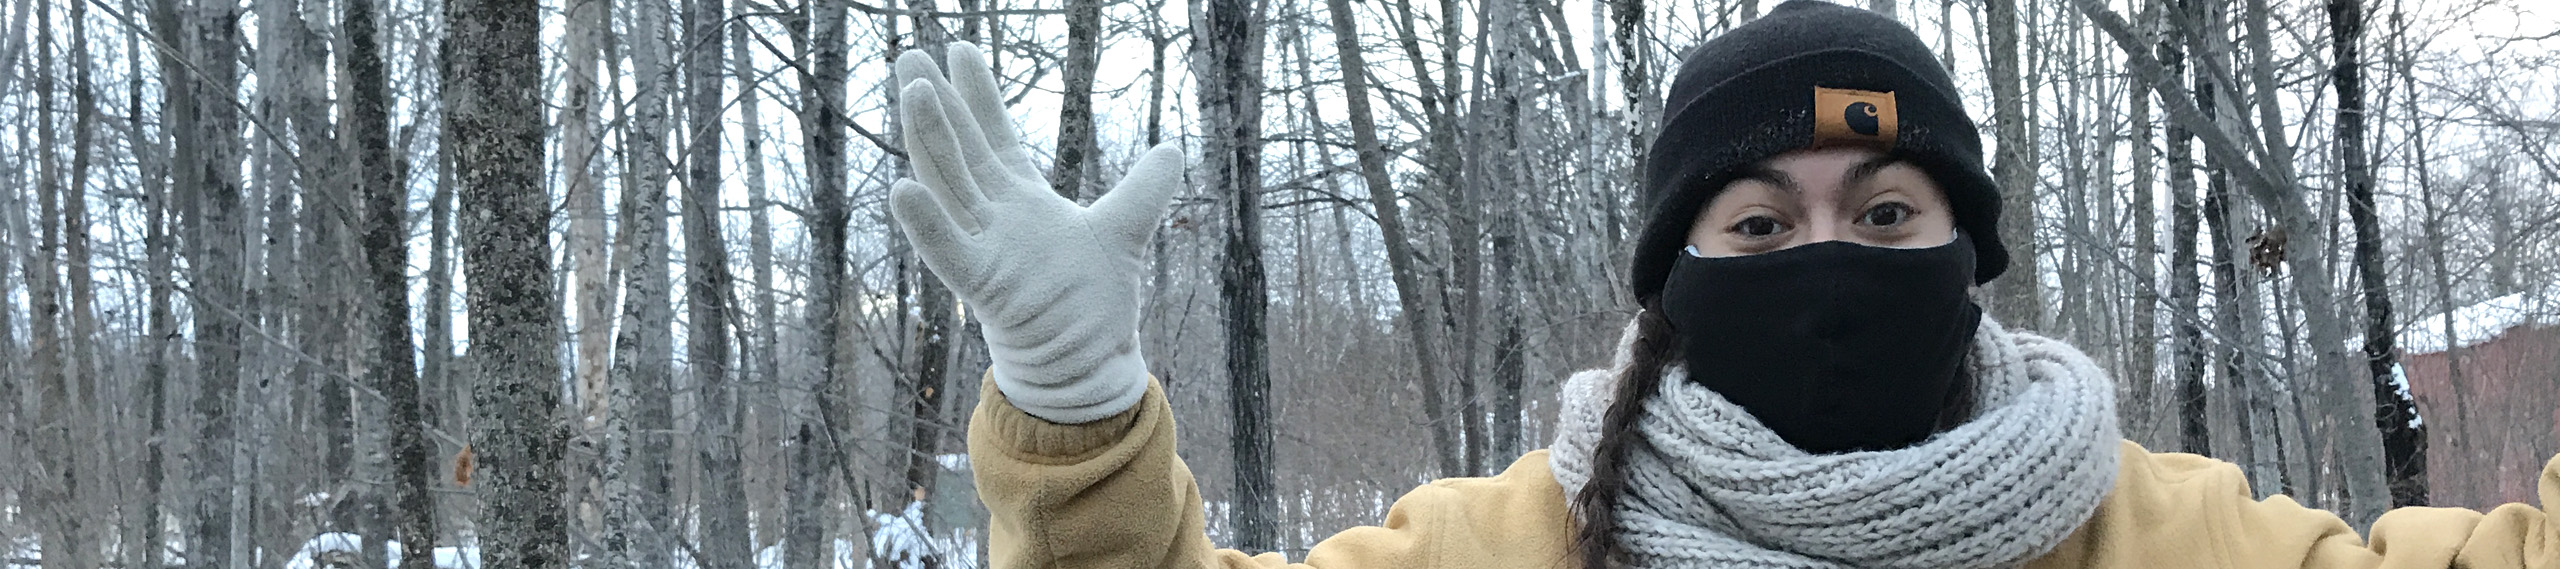 a person bundled up wearing a face mask, gestures the winter landscape